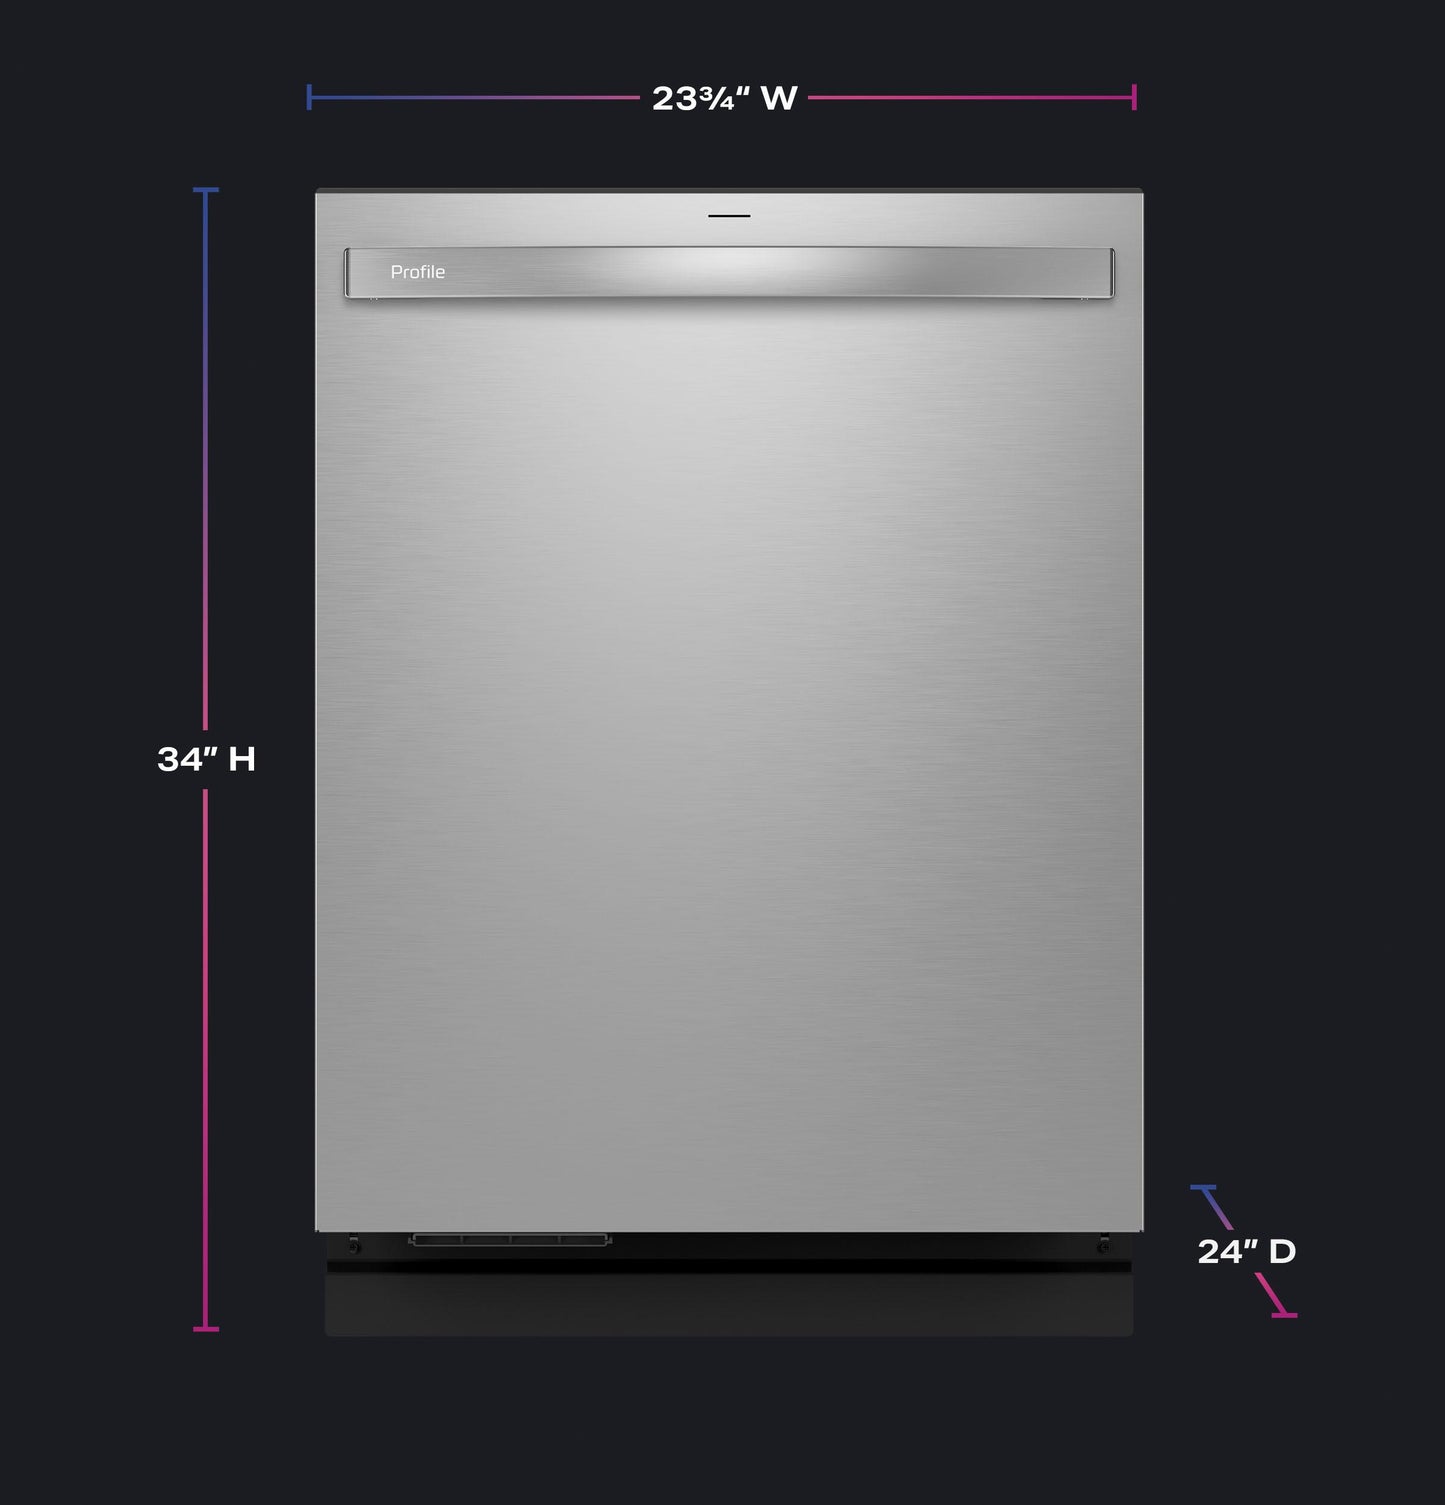 Ge Appliances PDT755SYVFS Ge Profile&#8482; Energy Star Smart Ultrafresh System Dishwasher With Microban&#8482; Antimicrobial Technology With Deep Clean Washing 3Rd Rack, 42 Dba